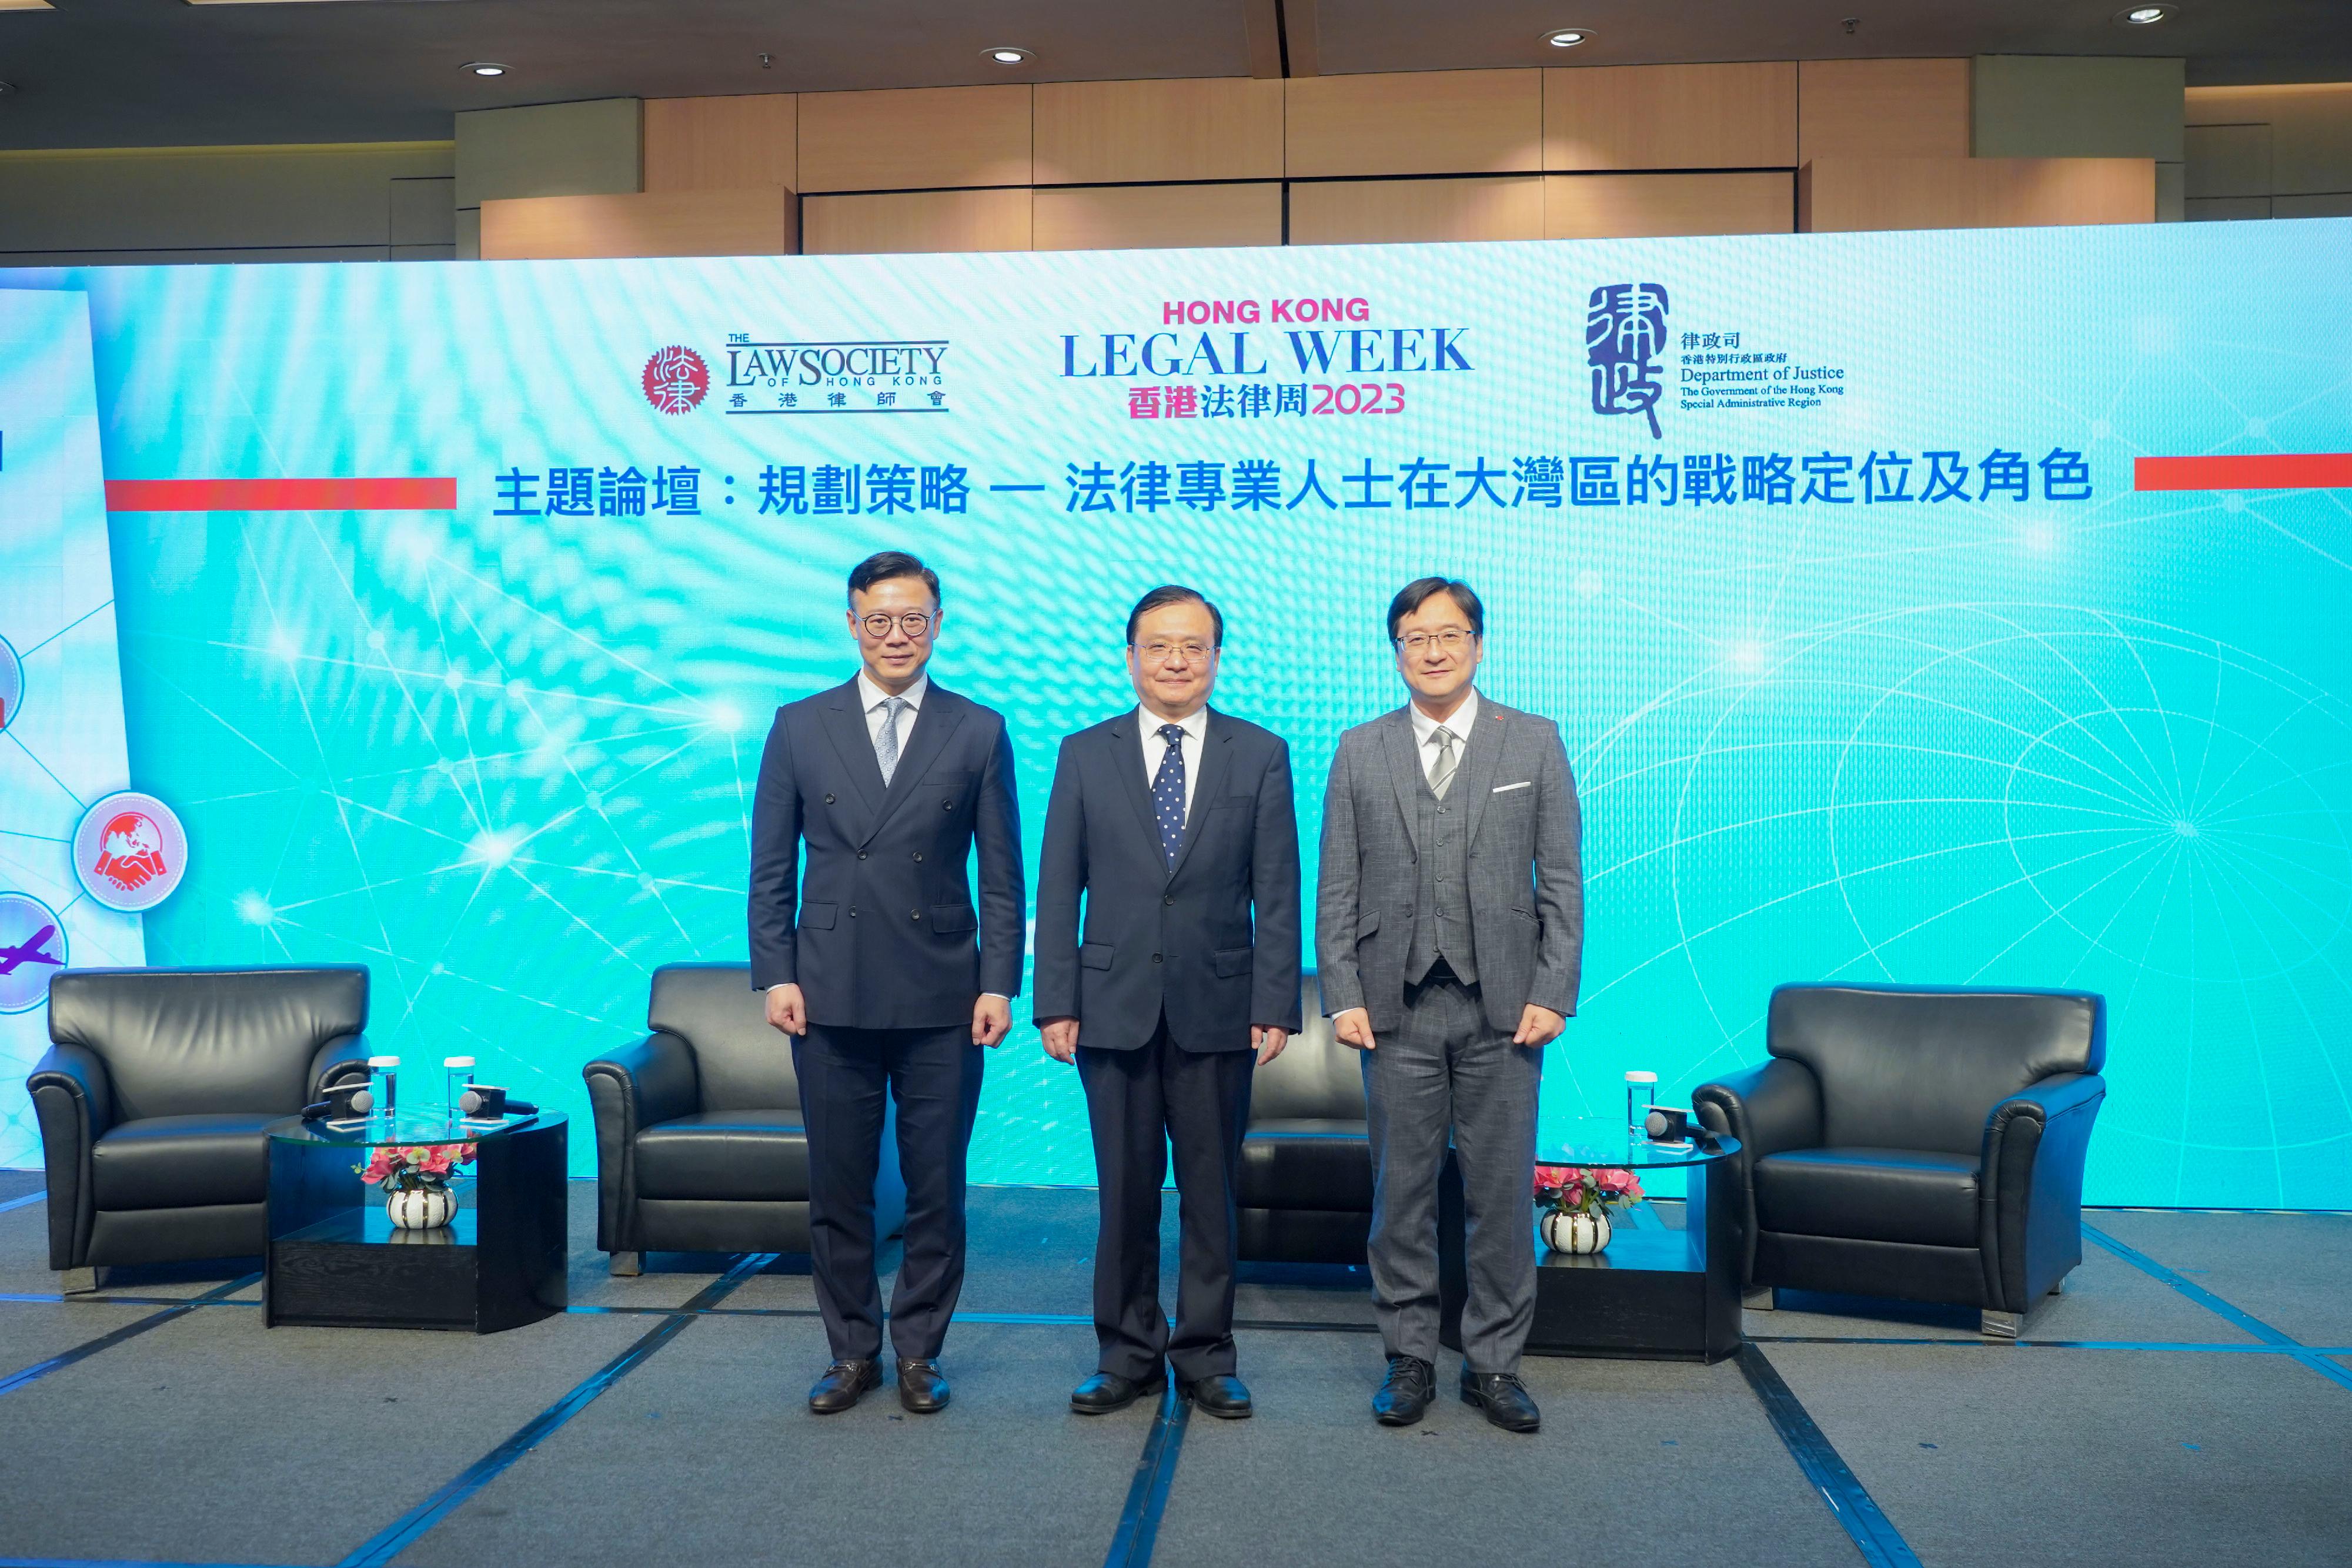 Deputy Commissioner of the Office of the Commissioner of the Ministry of Foreign Affairs of the People's Republic of China in the Hong Kong Special Administrative Region, Mr Fang Jianming (centre); the Deputy Secretary for Justice, Mr Cheung Kwok-kwan (left); and the President of the Law Society of Hong Kong, Mr Chan Chak-ming (right), are pictured at the Main Forum: Planning Strategy – Strategic positioning and roles of legal professionals in the Greater Bay Area of the GBA Young Lawyers Forum under the Hong Kong Legal Week 2023 today (November 9). 
 

